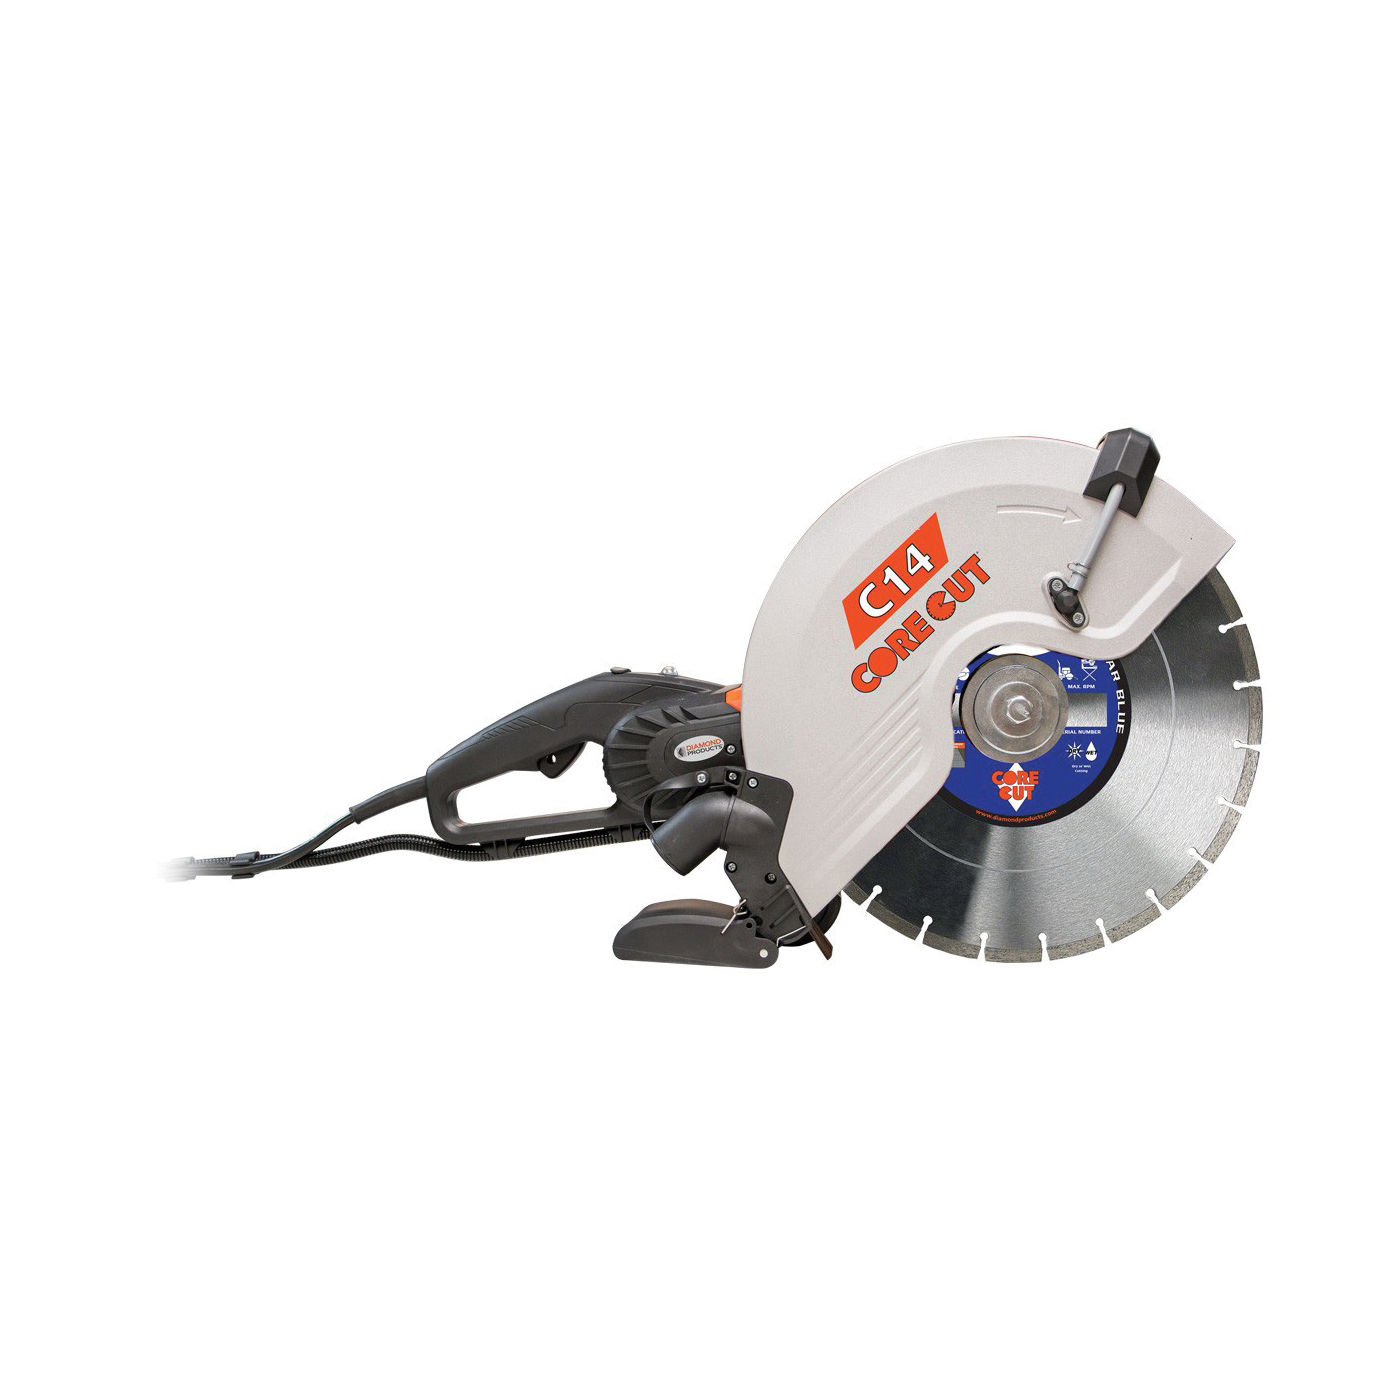 48975 Electric Hand Held Saw, 15 A, 14 in Dia Blade, 1 in Spindle, 5 in Cutting Capacity